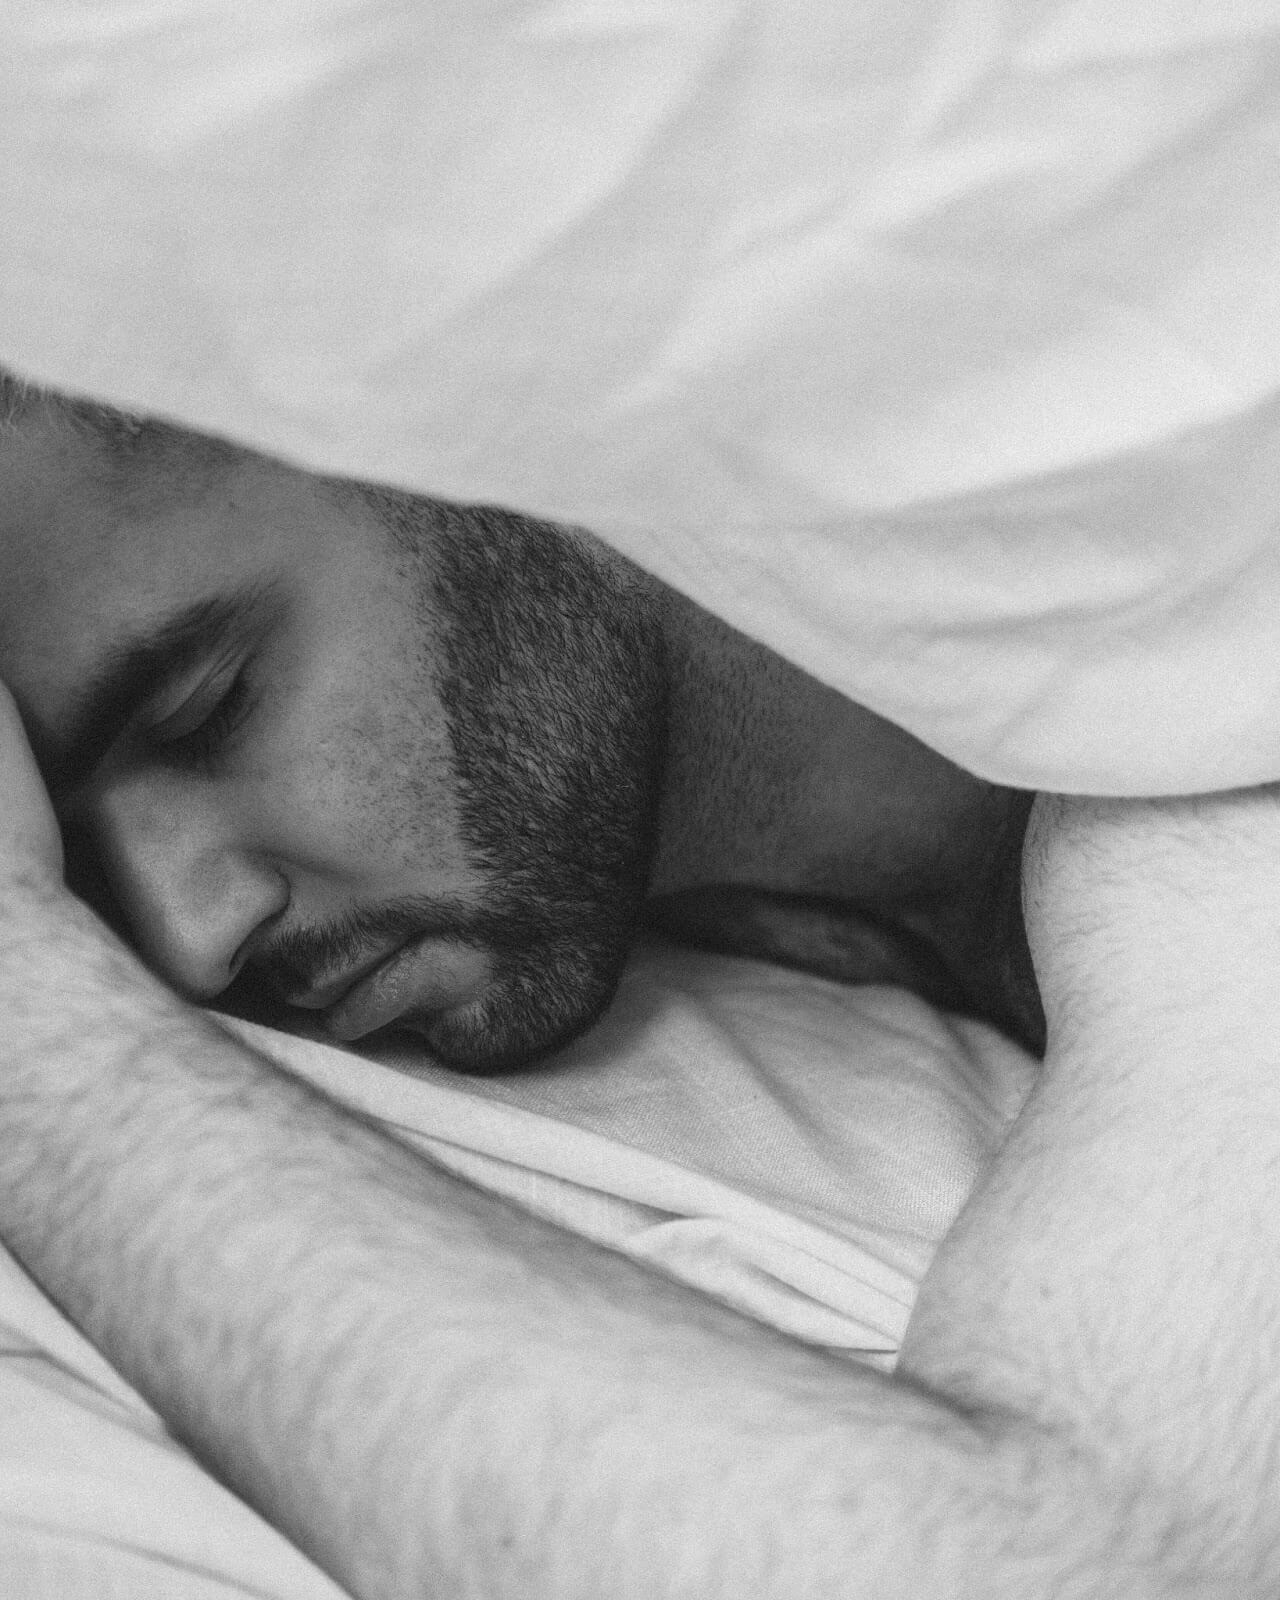 The sleep quality of heavy and light sleepers alike impacts overall health and well-being.